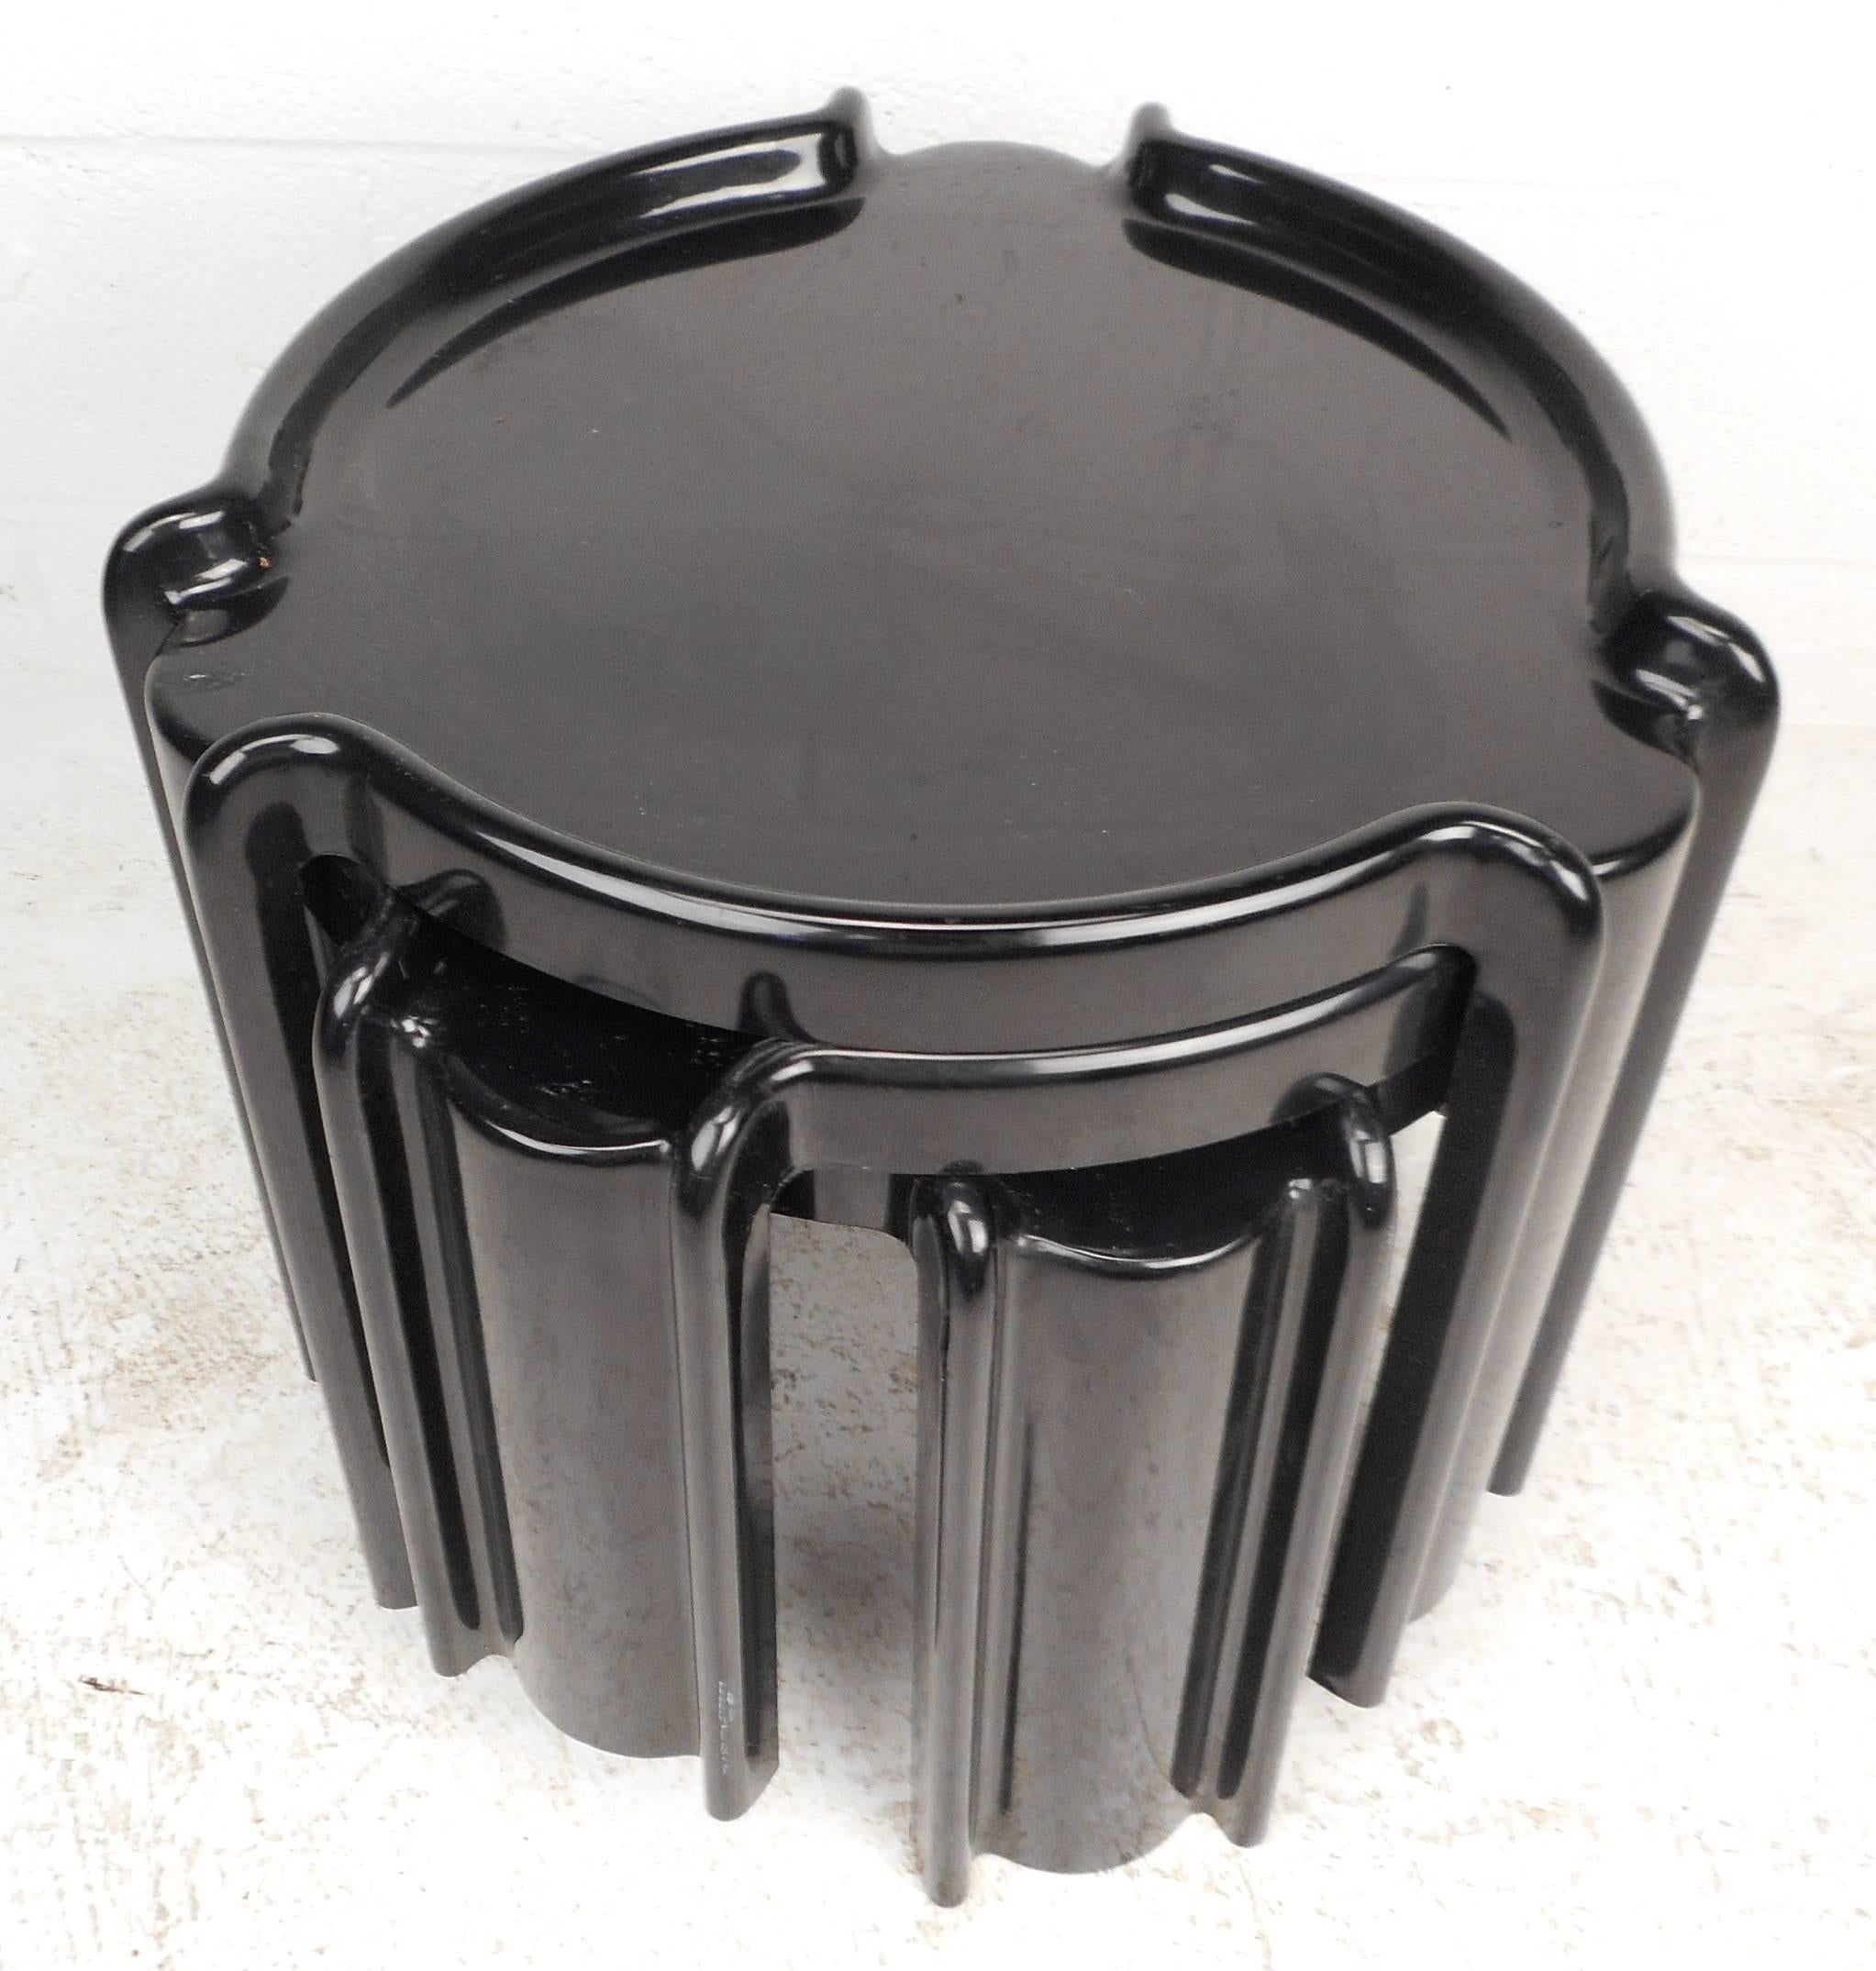 Wonderful set of three vintage modern nesting tables with unique molded design allowing them to fit easily on top of one another. Sleek jet black color with rounded raised edges and space saving ability. Perfect addition to any modern interior.